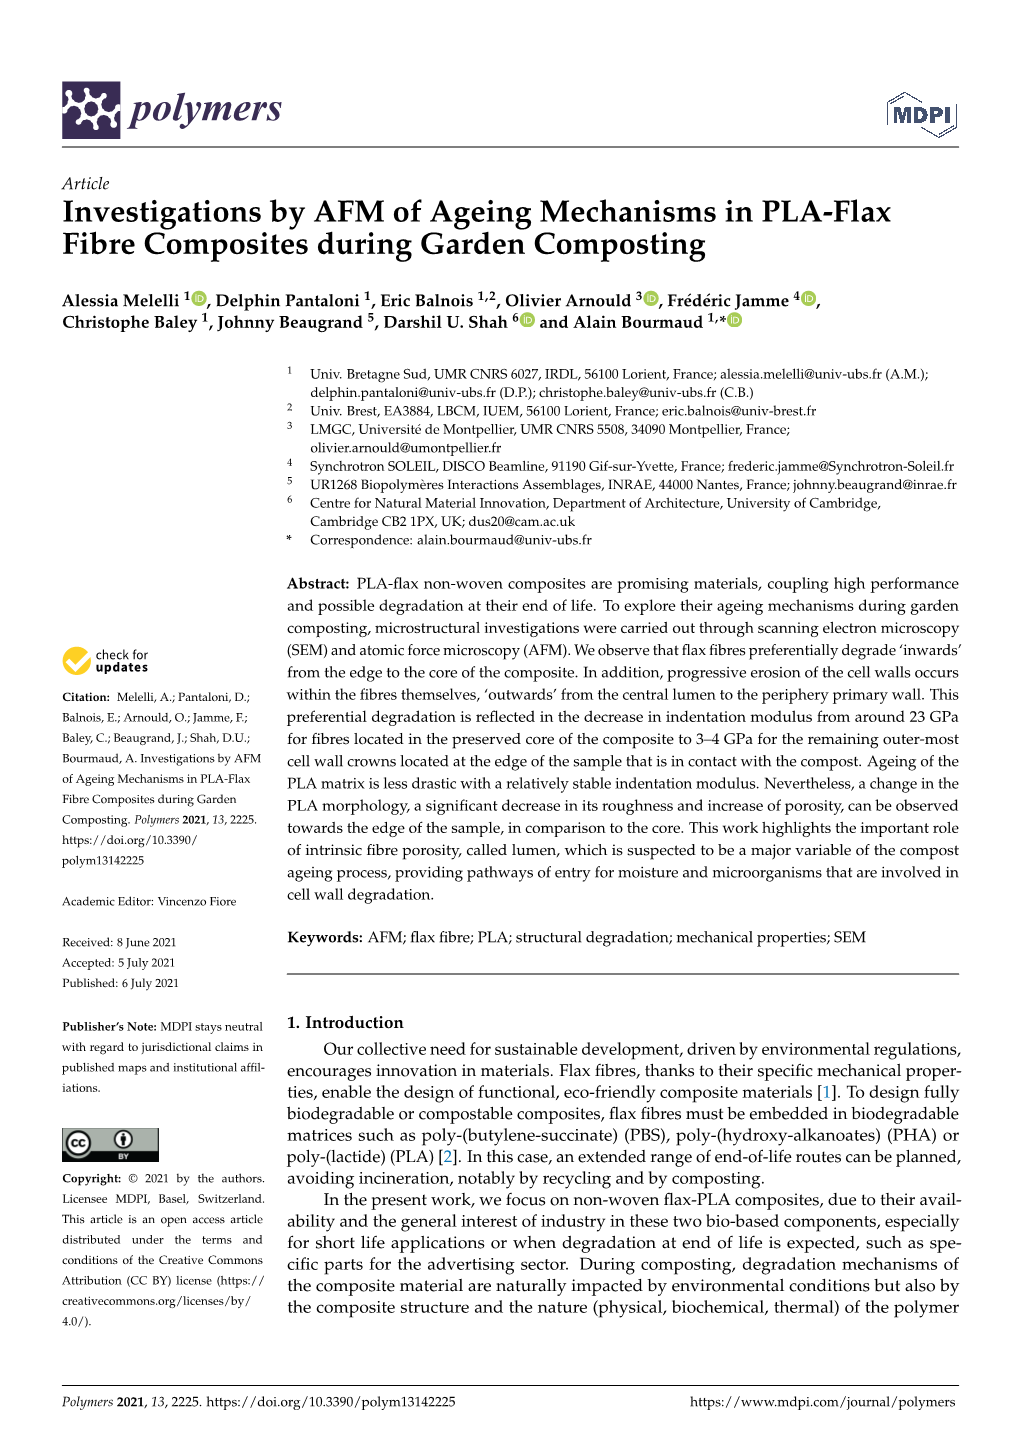 Investigations by AFM of Ageing Mechanisms in PLA-Flax Fibre Composites During Garden Composting